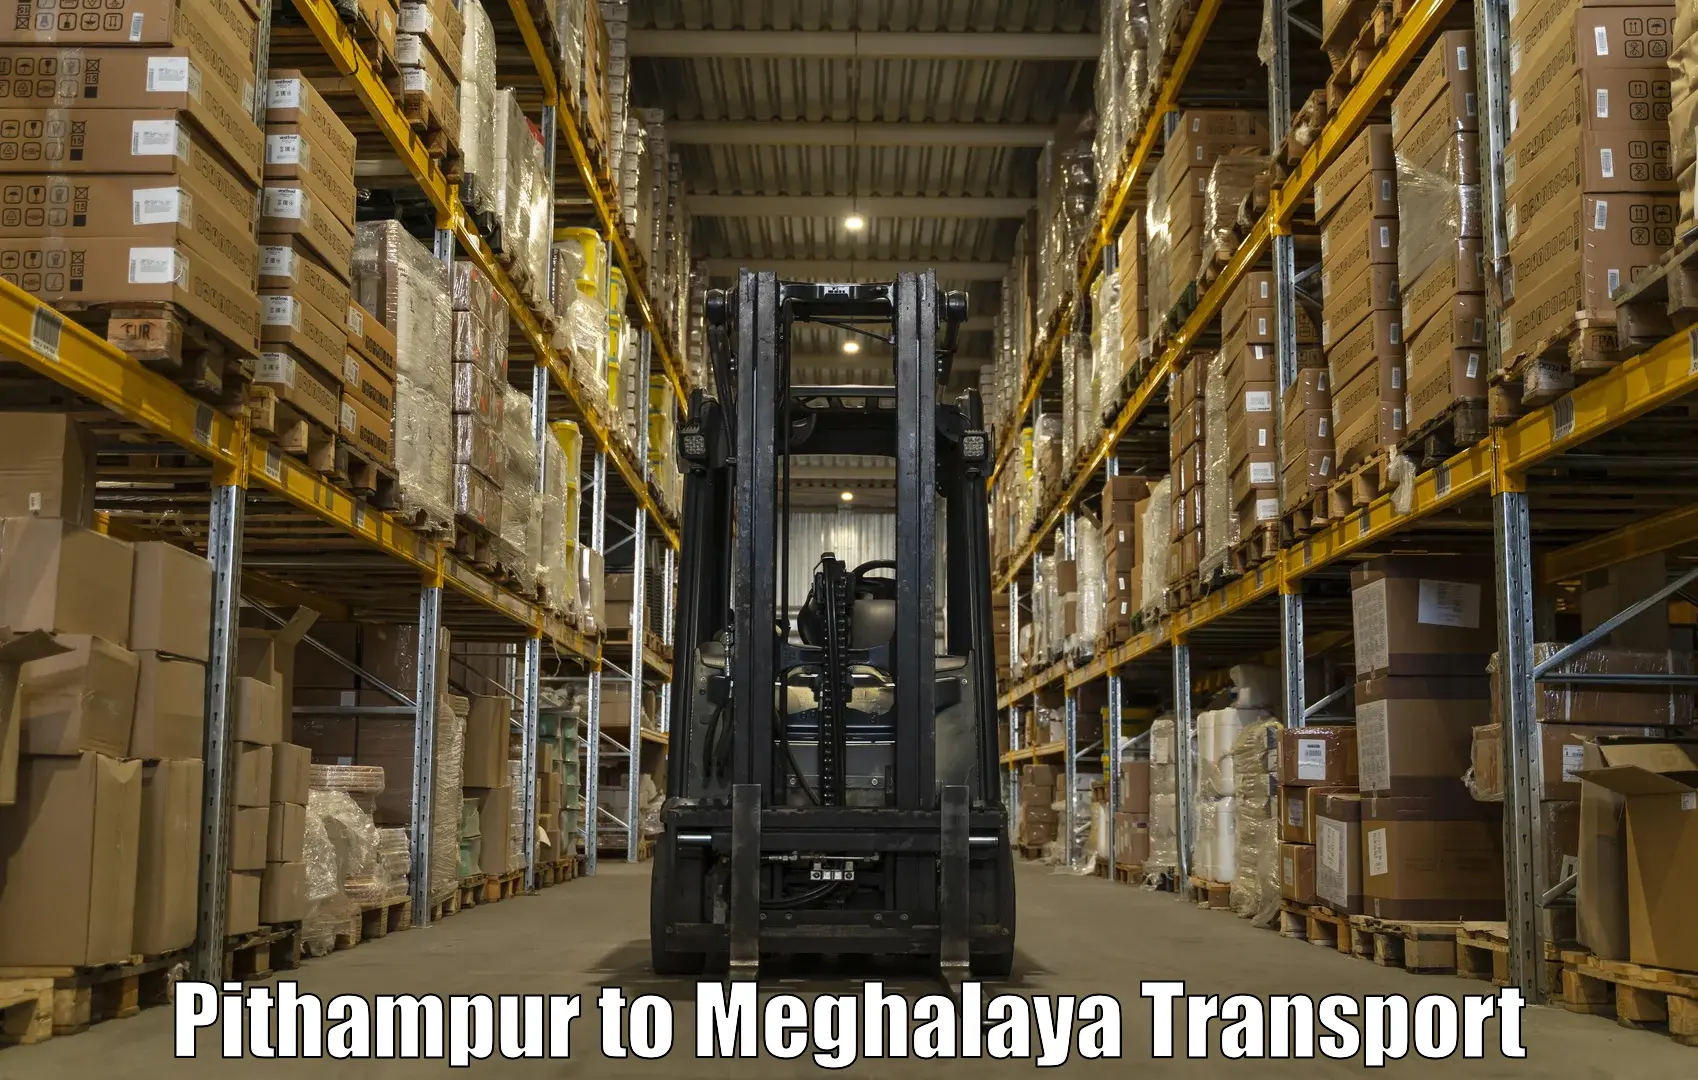 Air freight transport services Pithampur to Umsaw